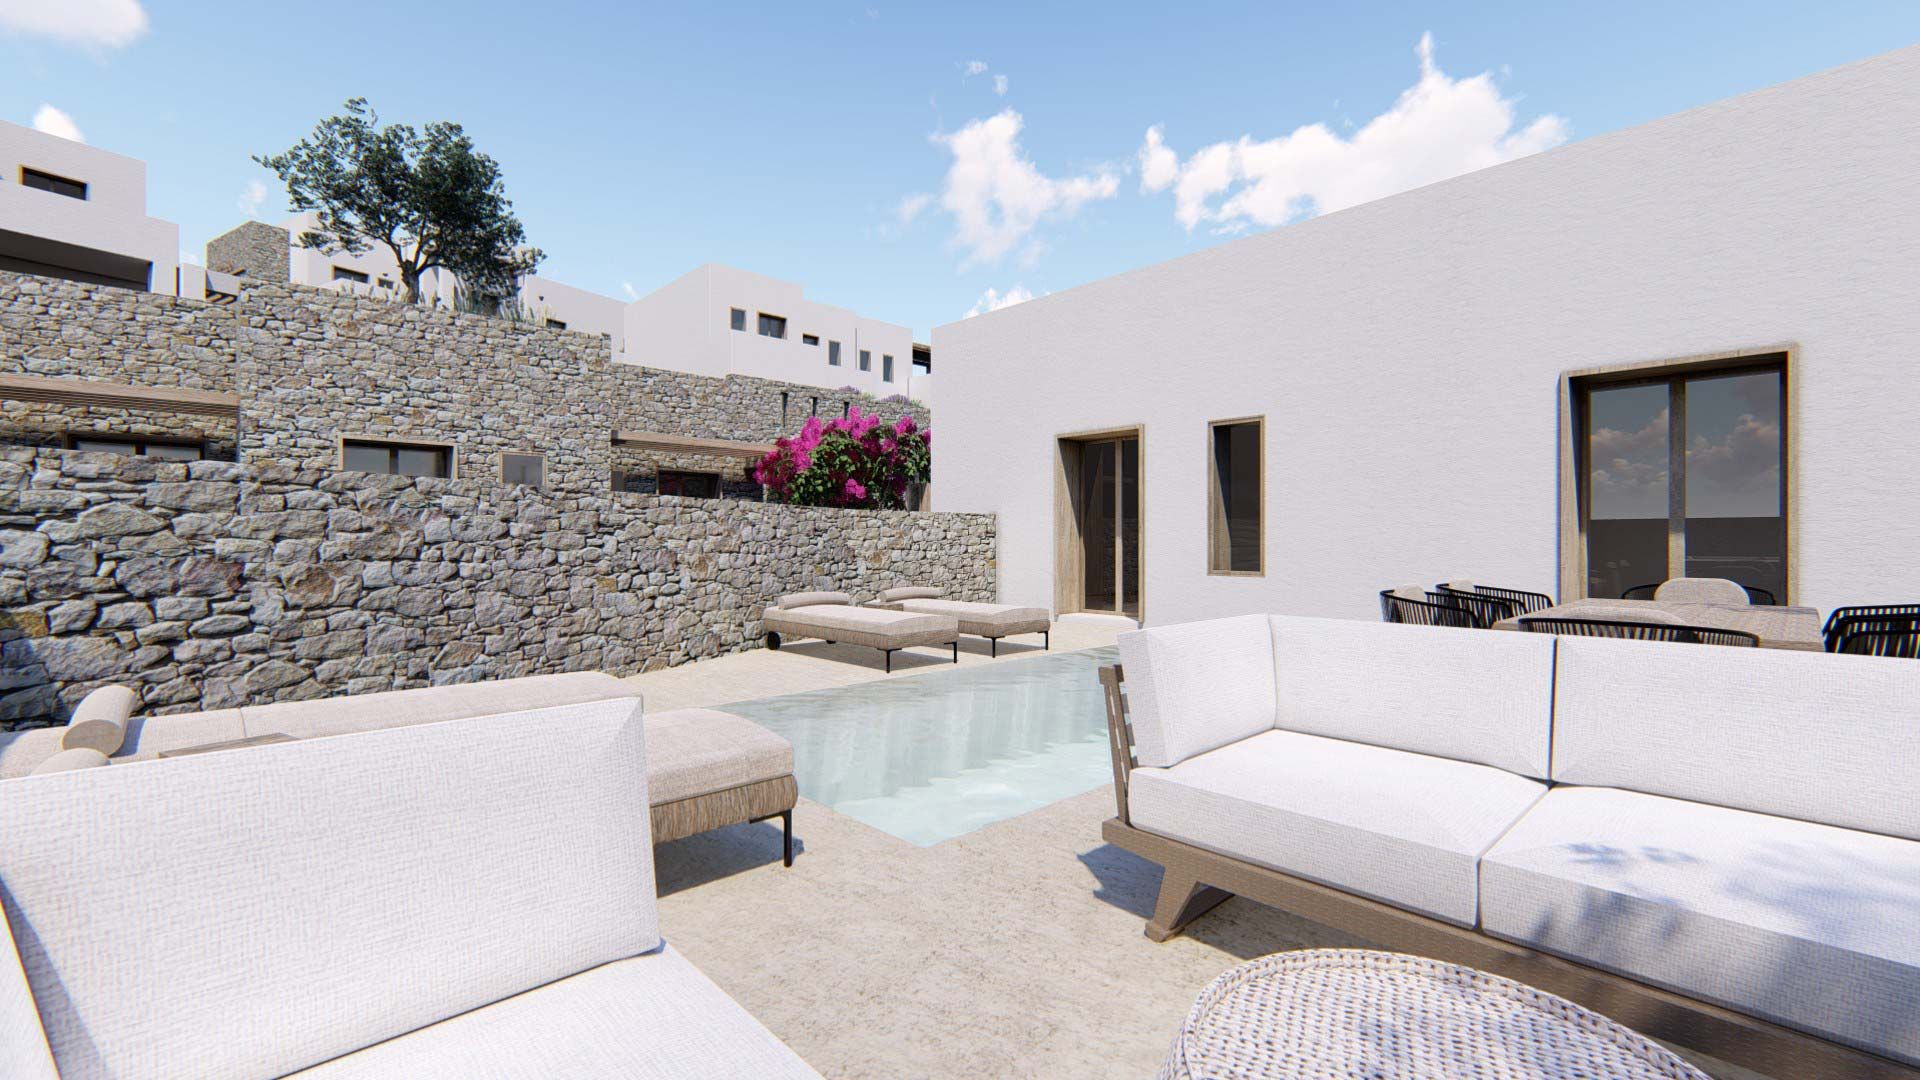 Study & Construction of a 5-star Hotel, Sotires, Paros